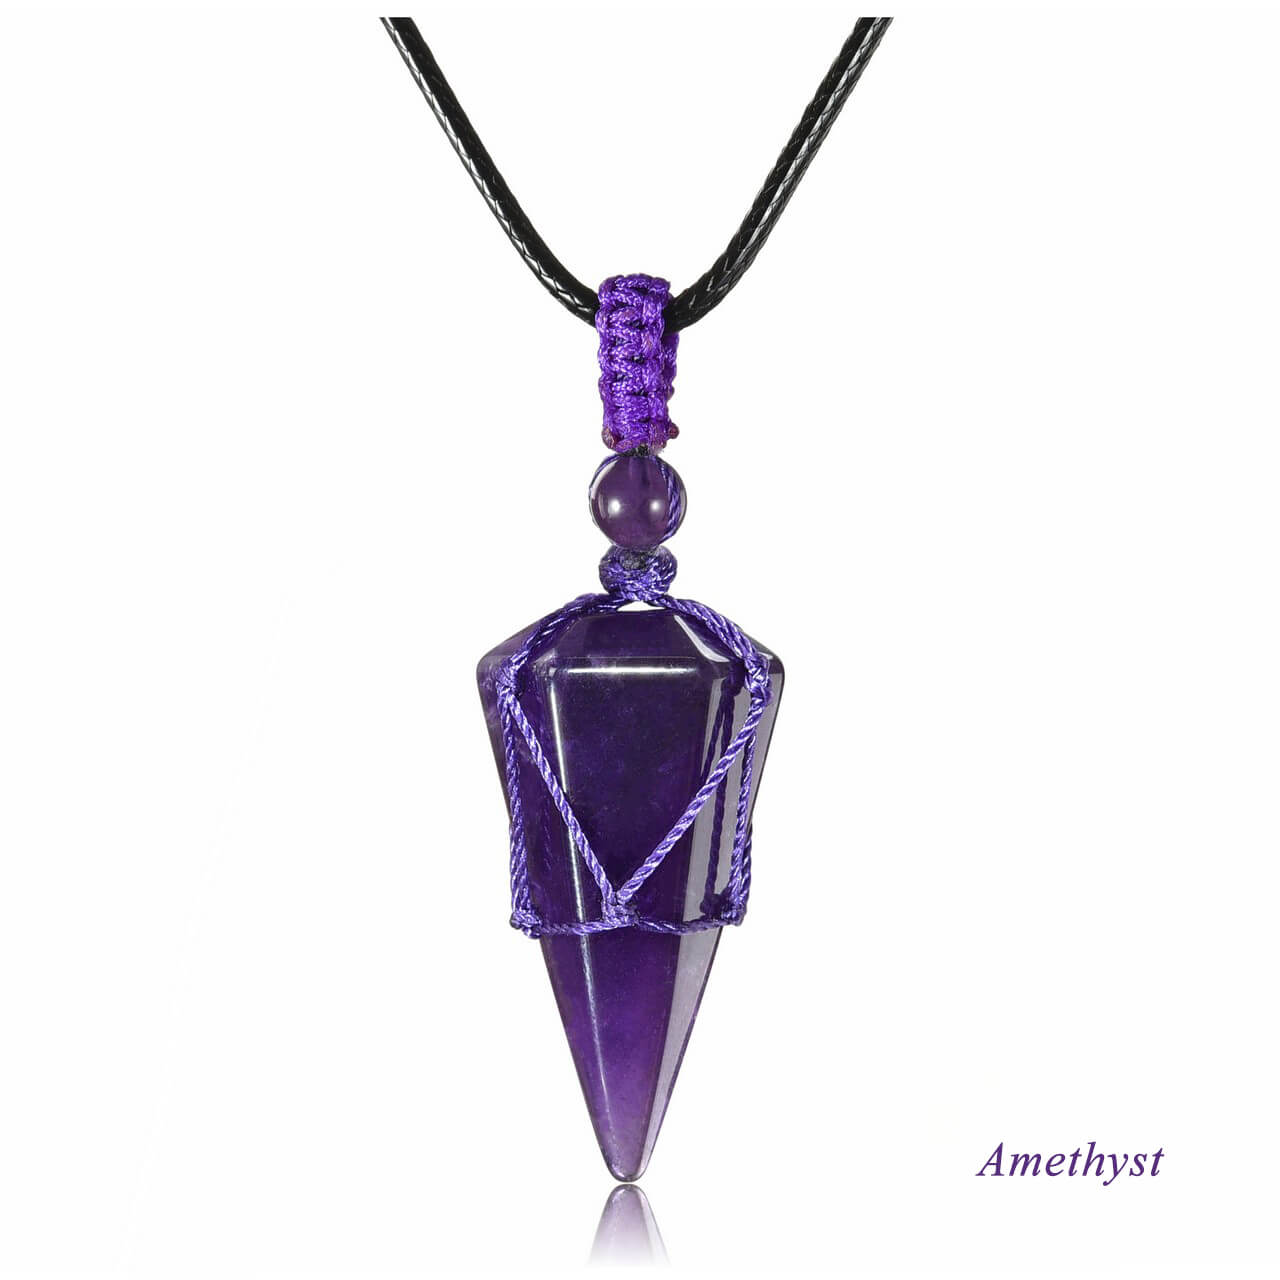 Jovivi natural amethyst pointed pendant necklace for women, front side